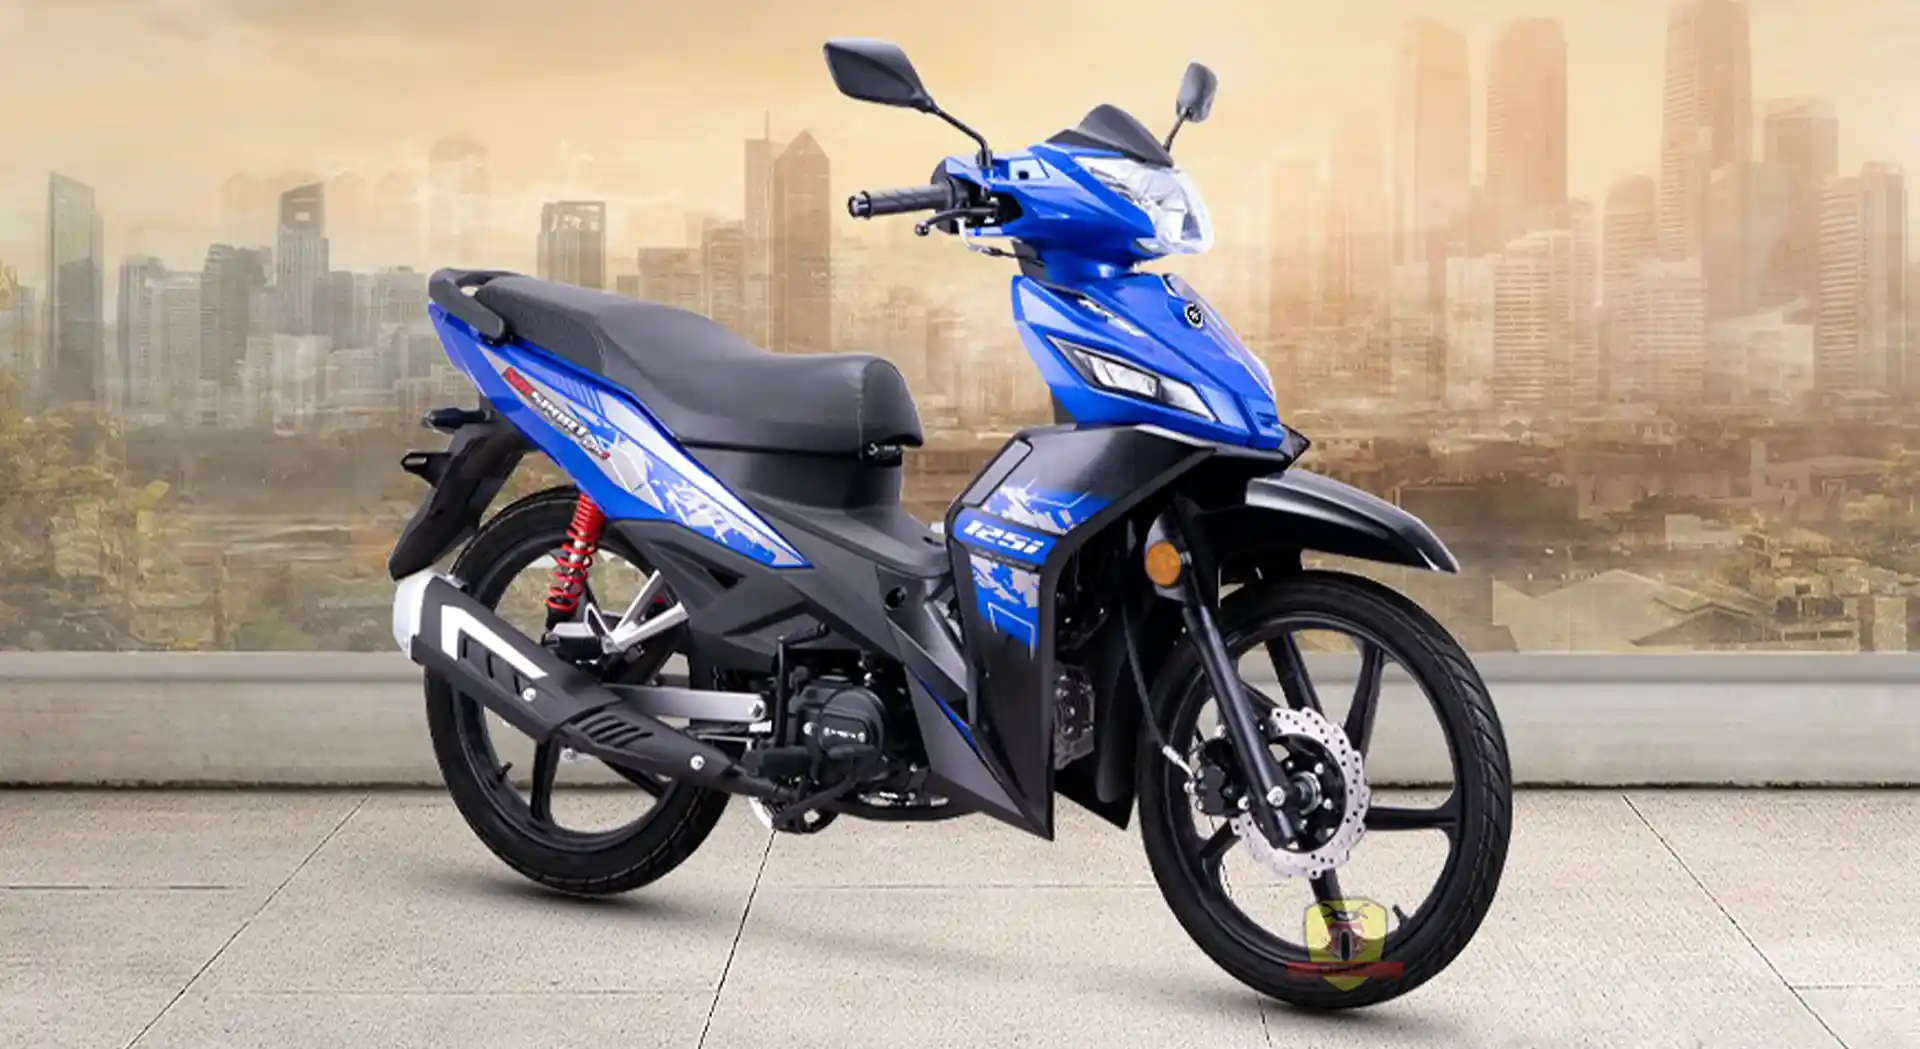 New Moped WMoto SM125i Officially Launched, Price IDR 19 Million